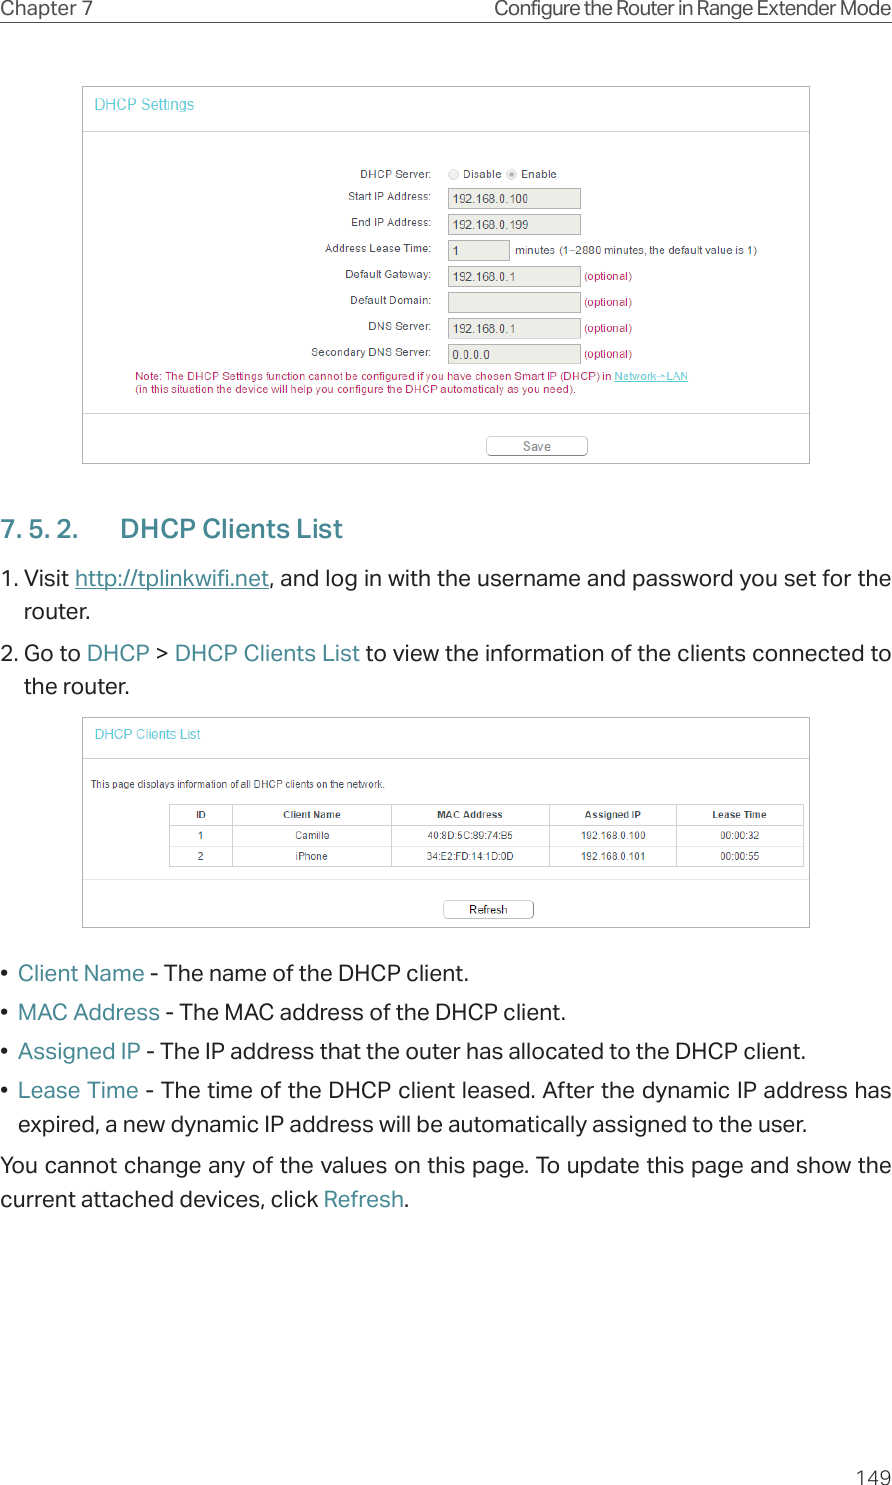 149Chapter 7 Configure the Router in Range Extender Mode7. 5. 2.  DHCP Clients List1. Visit http://tplinkwifi.net, and log in with the username and password you set for the router.2. Go to DHCP &gt; DHCP Clients List to view the information of the clients connected to the router.•  Client Name - The name of the DHCP client.•  MAC Address - The MAC address of the DHCP client. •  Assigned IP - The IP address that the outer has allocated to the DHCP client.•  Lease Time - The time of the DHCP client leased. After the dynamic IP address has expired, a new dynamic IP address will be automatically assigned to the user.  You cannot change any of the values on this page. To update this page and show the current attached devices, click Refresh.